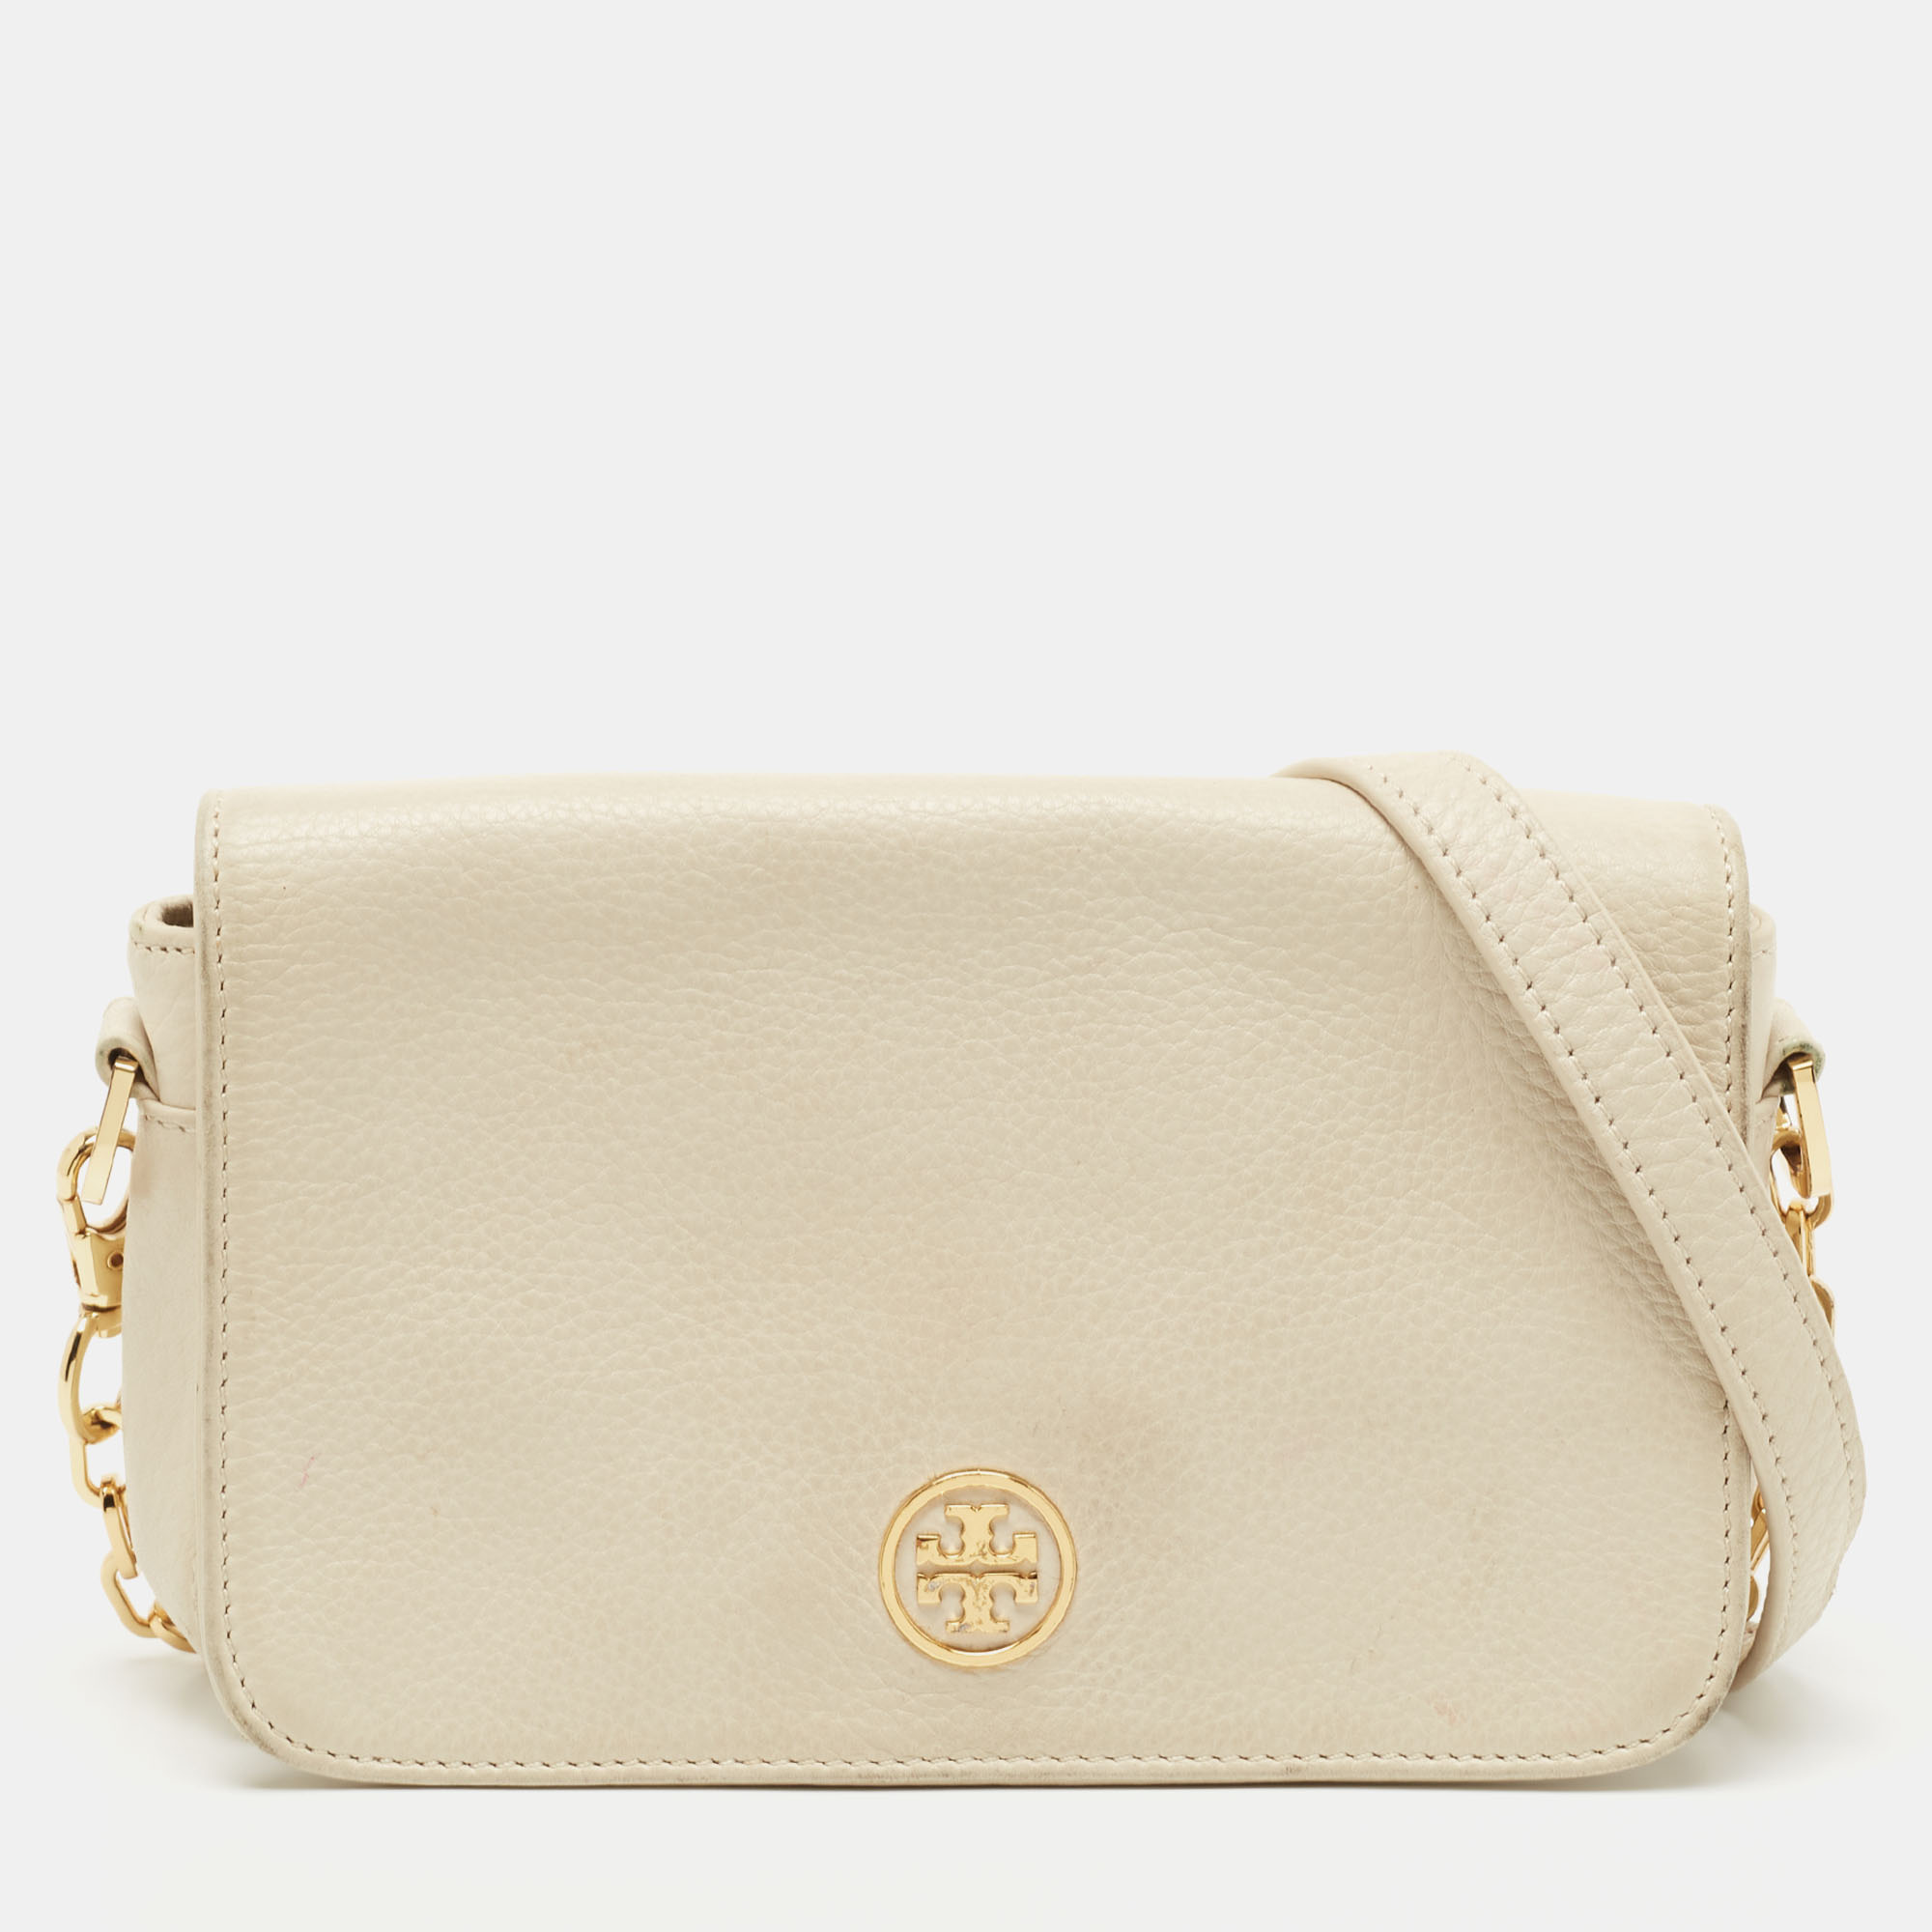 Pre-owned Tory Burch Off White Leather Robinson Flap Crossbody Bag